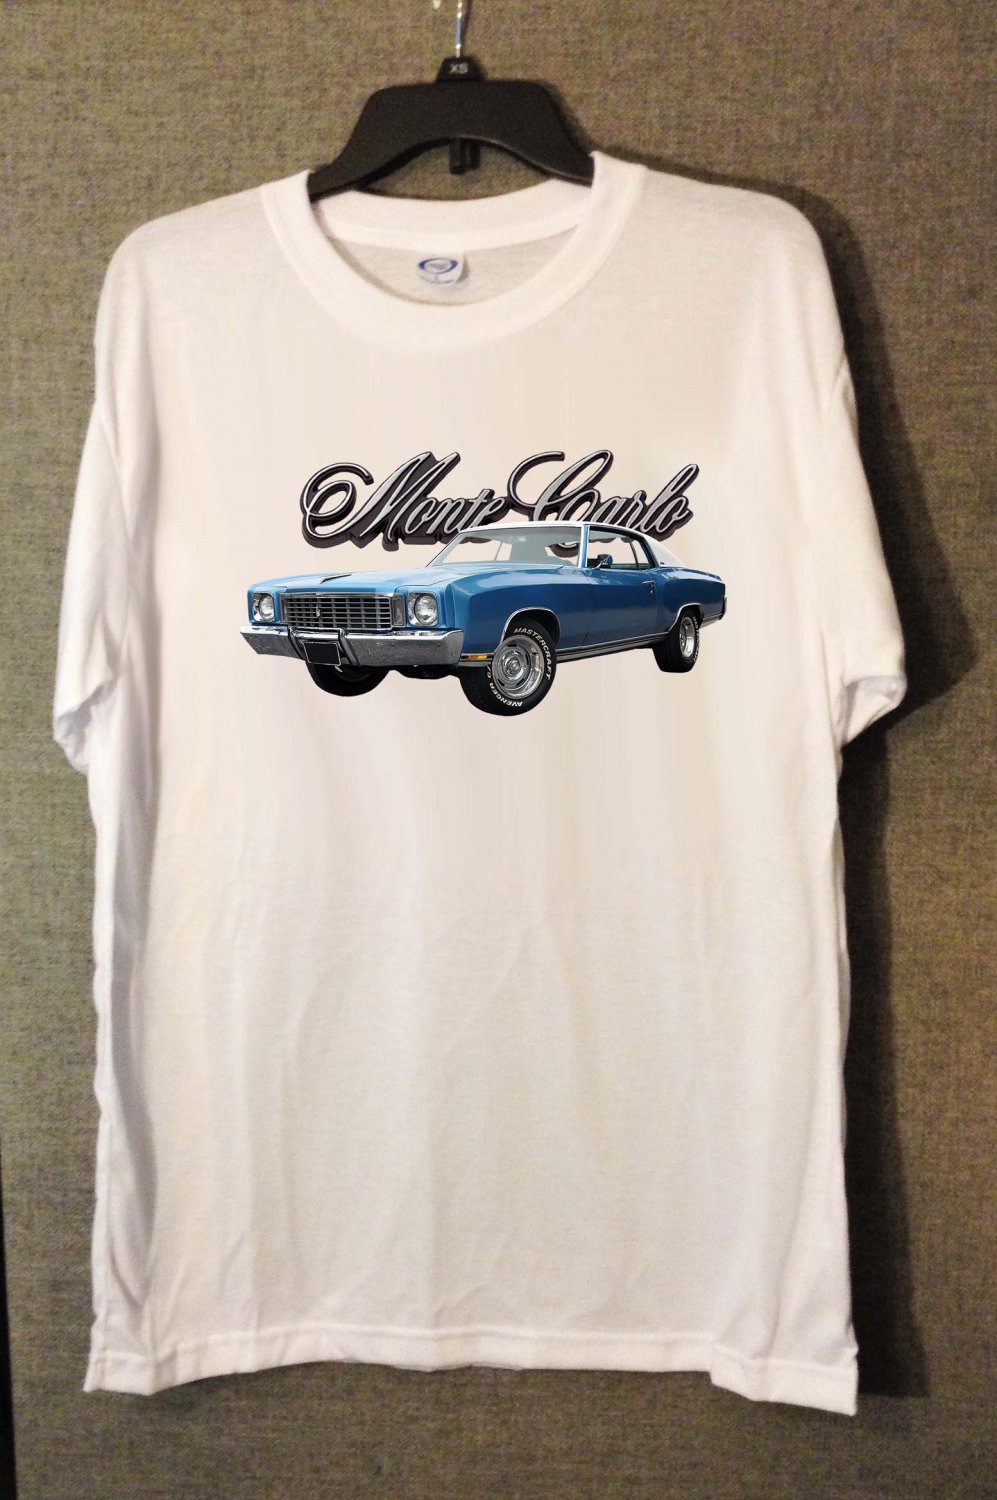 New 1972 Chevy Monte Carlo White T-shirt  (XX-Large)